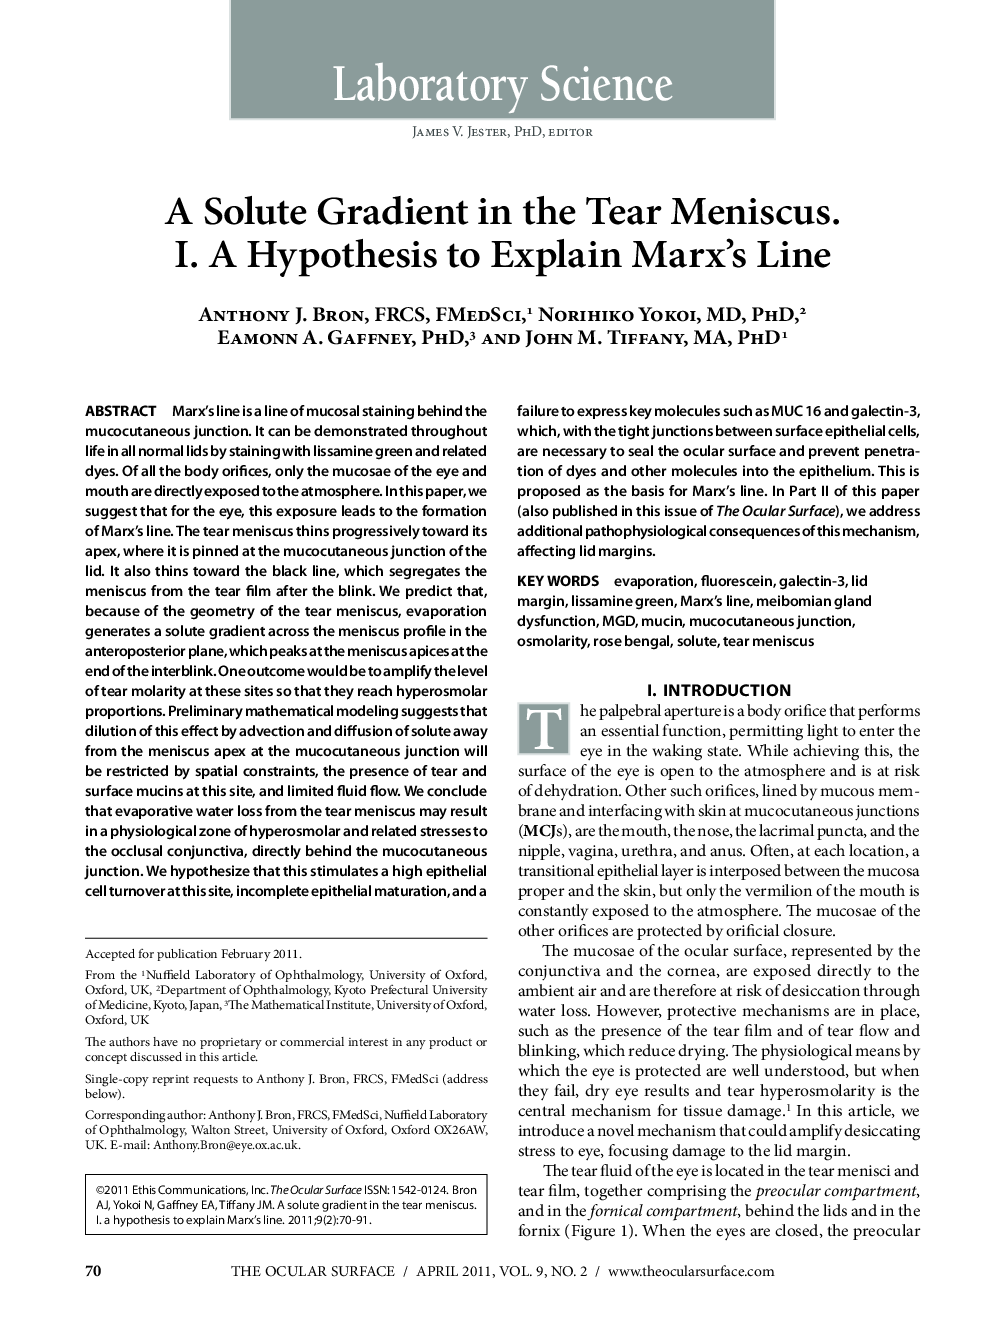 A Solute Gradient in the Tear Meniscus. I. A Hypothesis to Explain Marx's Line 